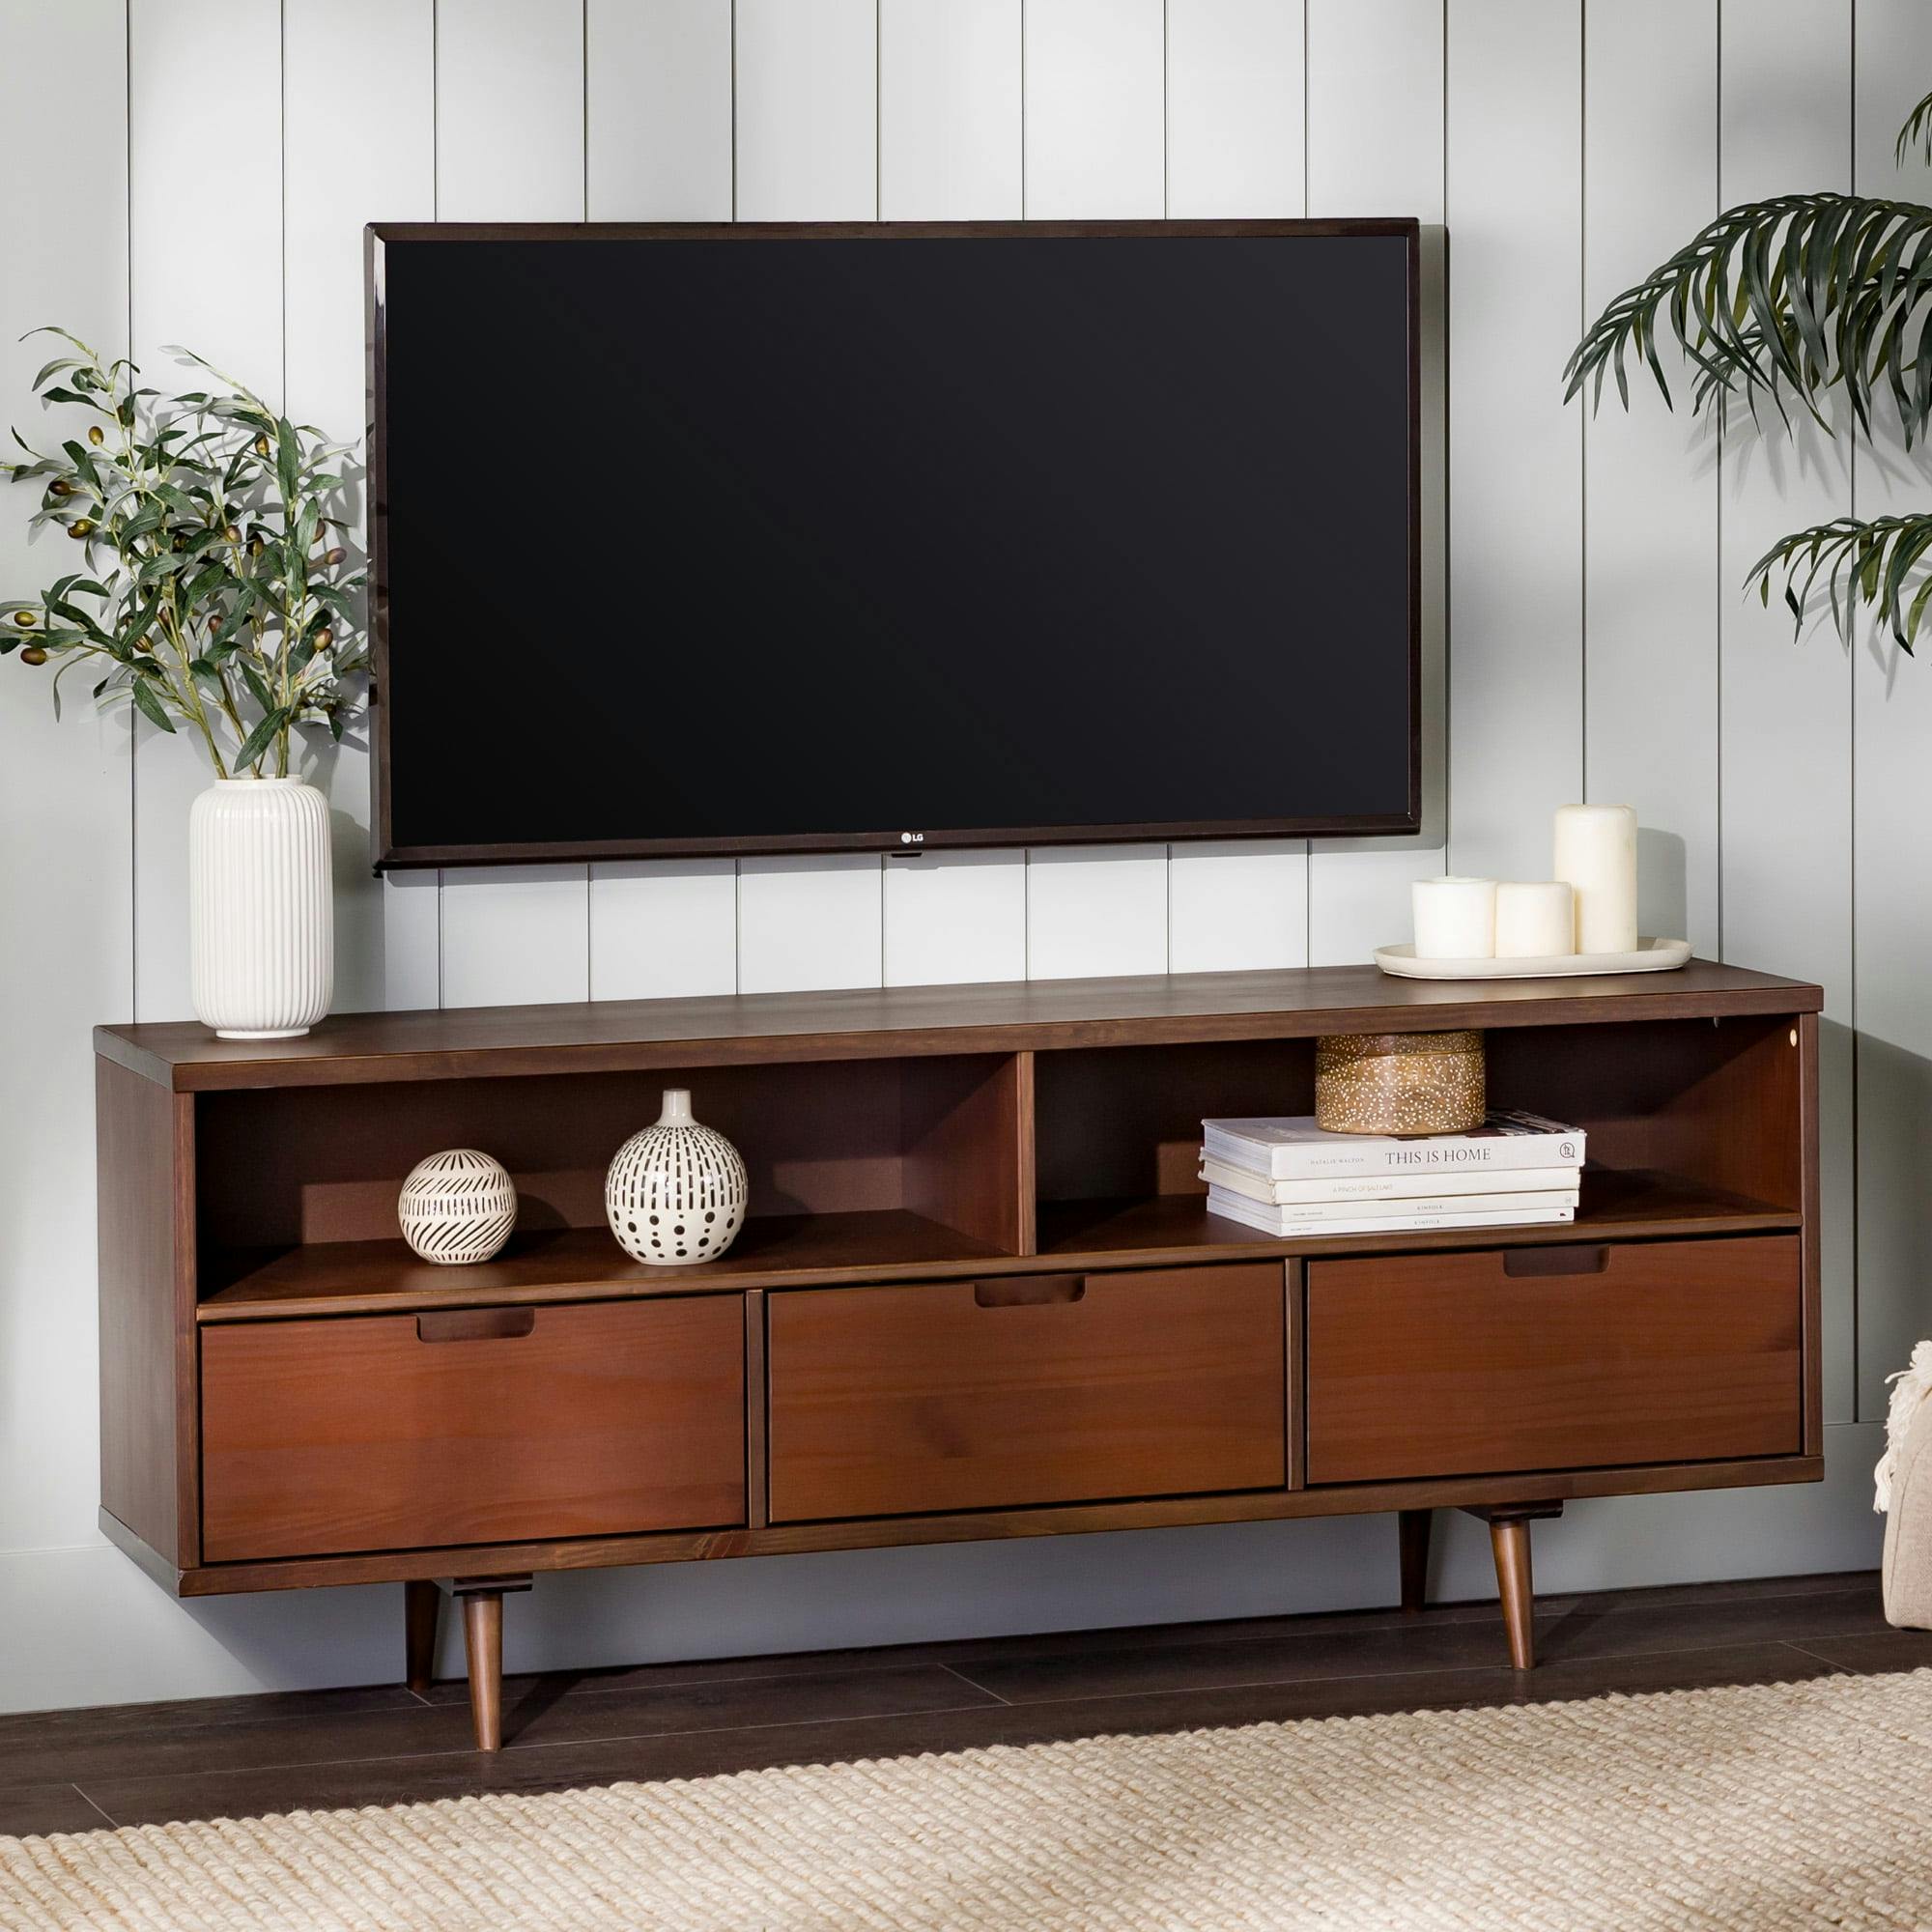 Mid-Century Modern 58" Walnut TV Stand with 3 Drawers and Open Shelves